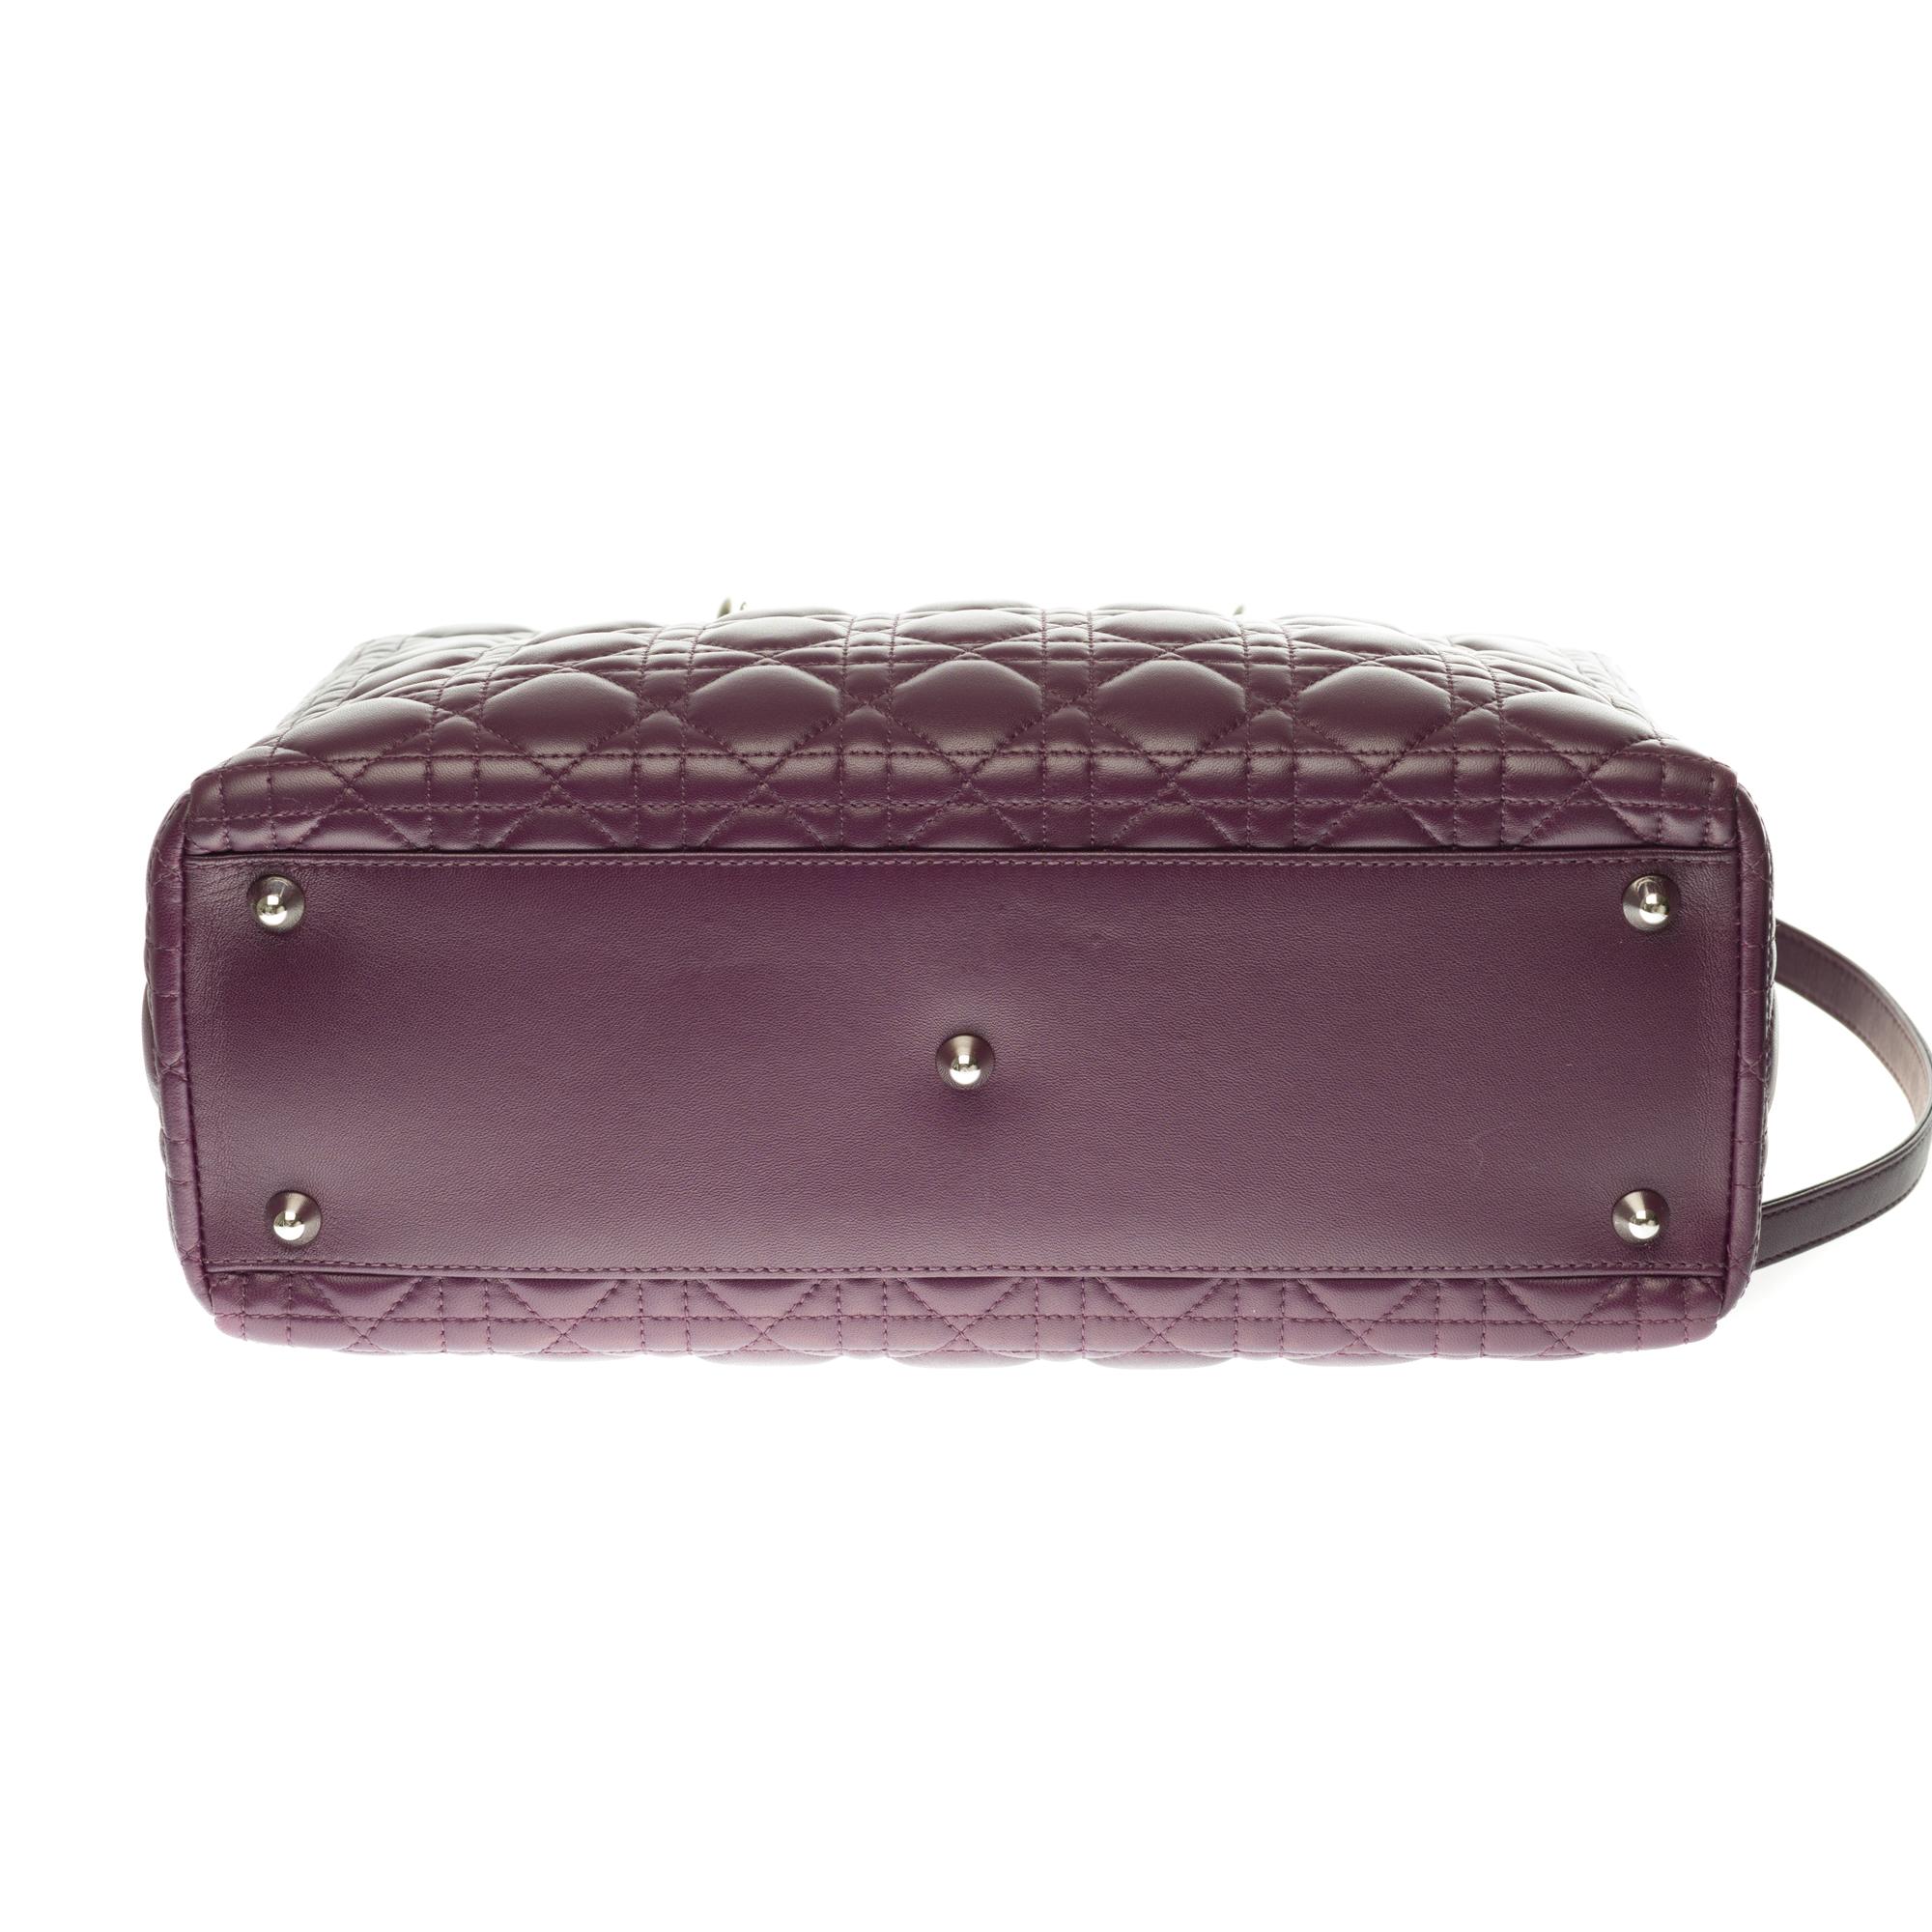  Lady Dior GM ( large model) shoulder bag with strap in purple cannage, SHW 1